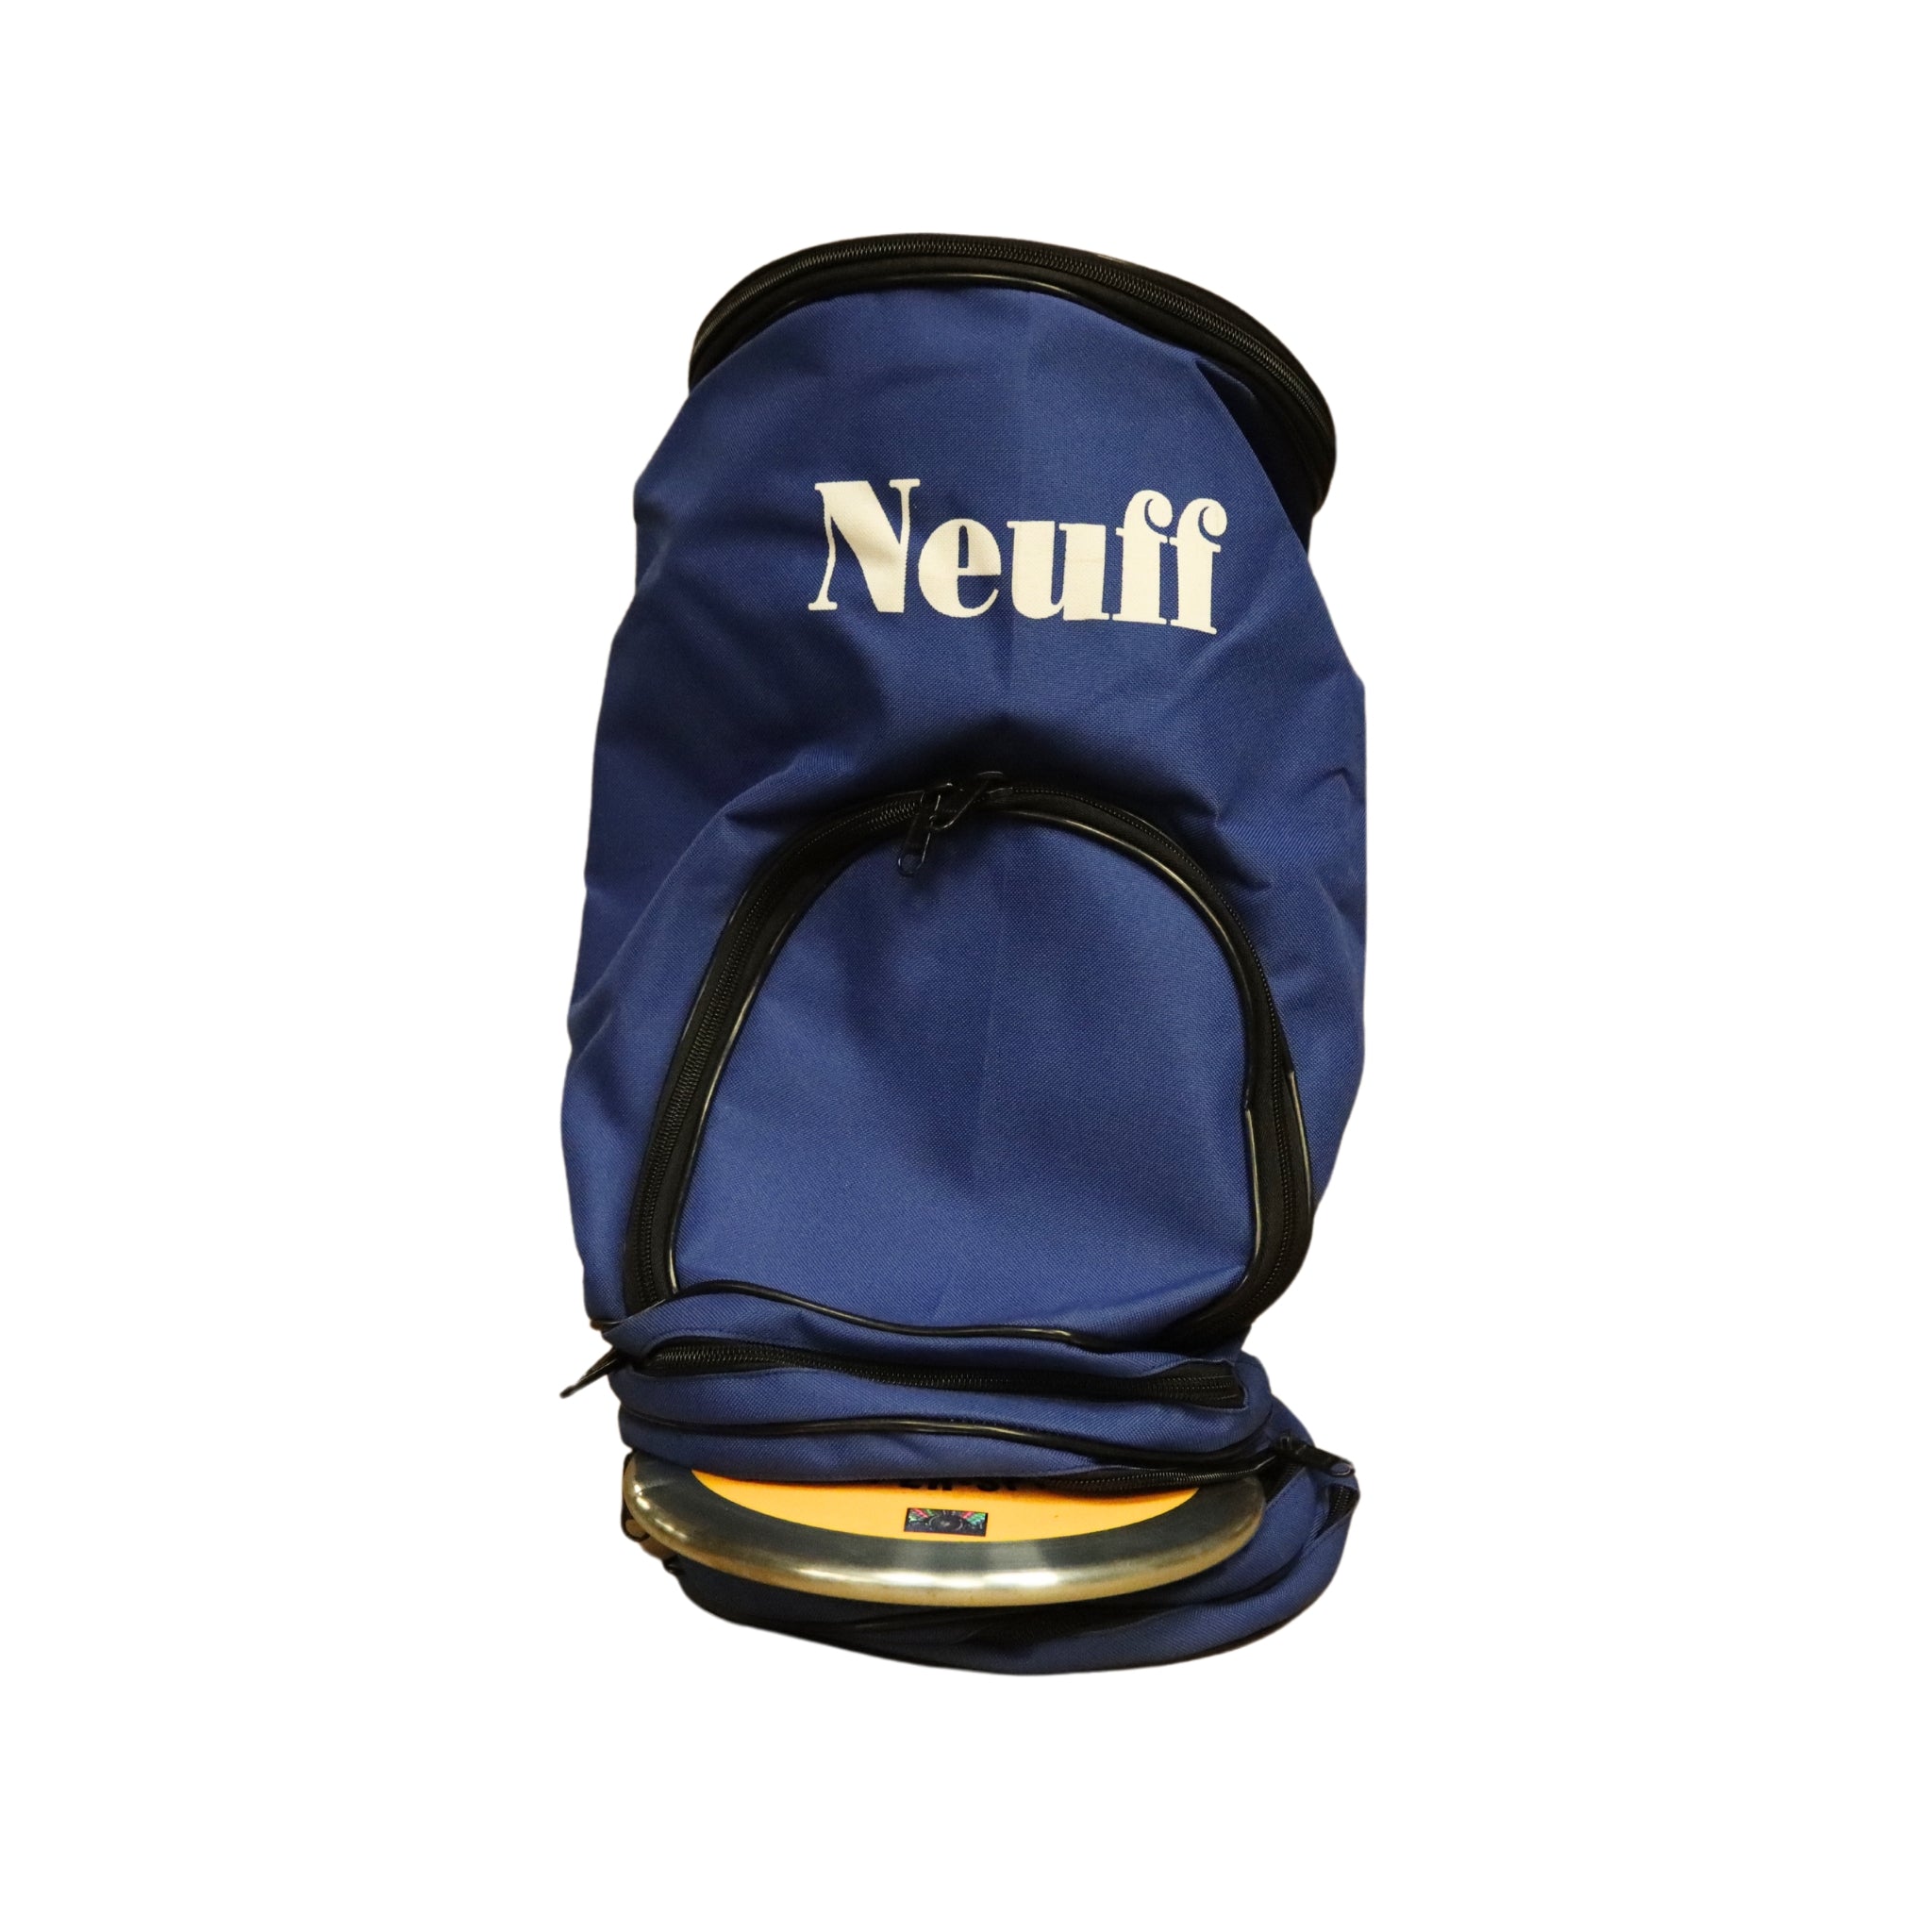 Nelco discus kit bag royal blue to hold discus and kit